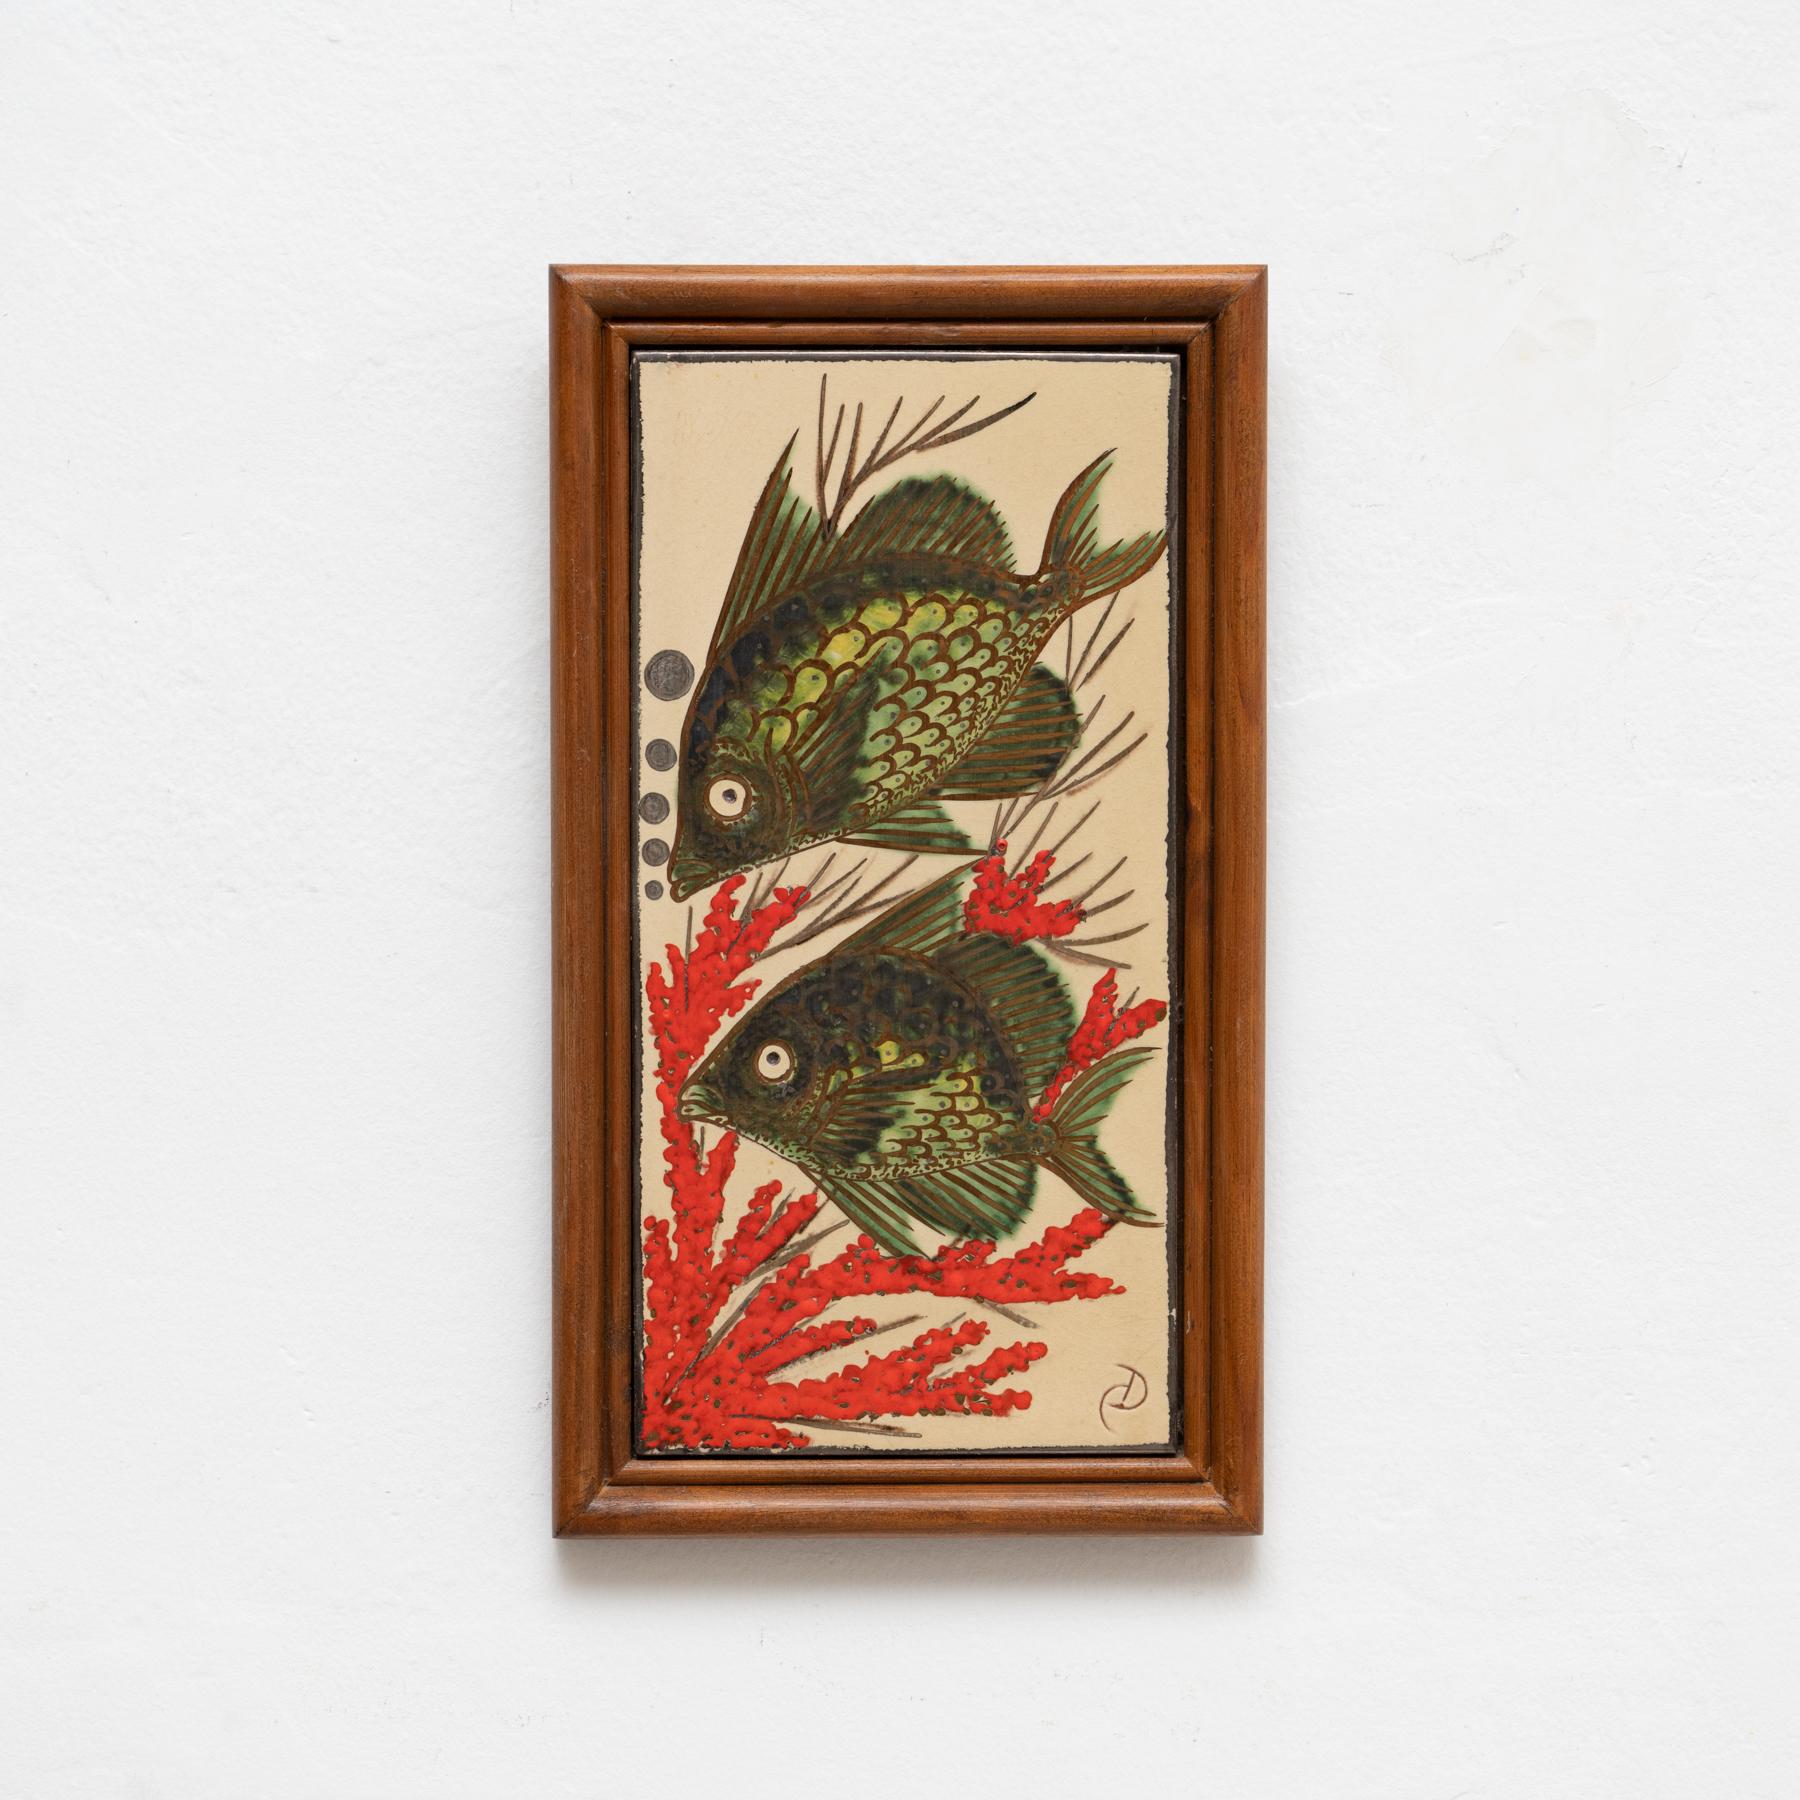 Ceramic hand painted artwork by Catalan artist Diaz COSTA, circa 1960.
Framed. Signed.

In original condition, with minor wear consistent of age and use, preserving a beautiful patina.